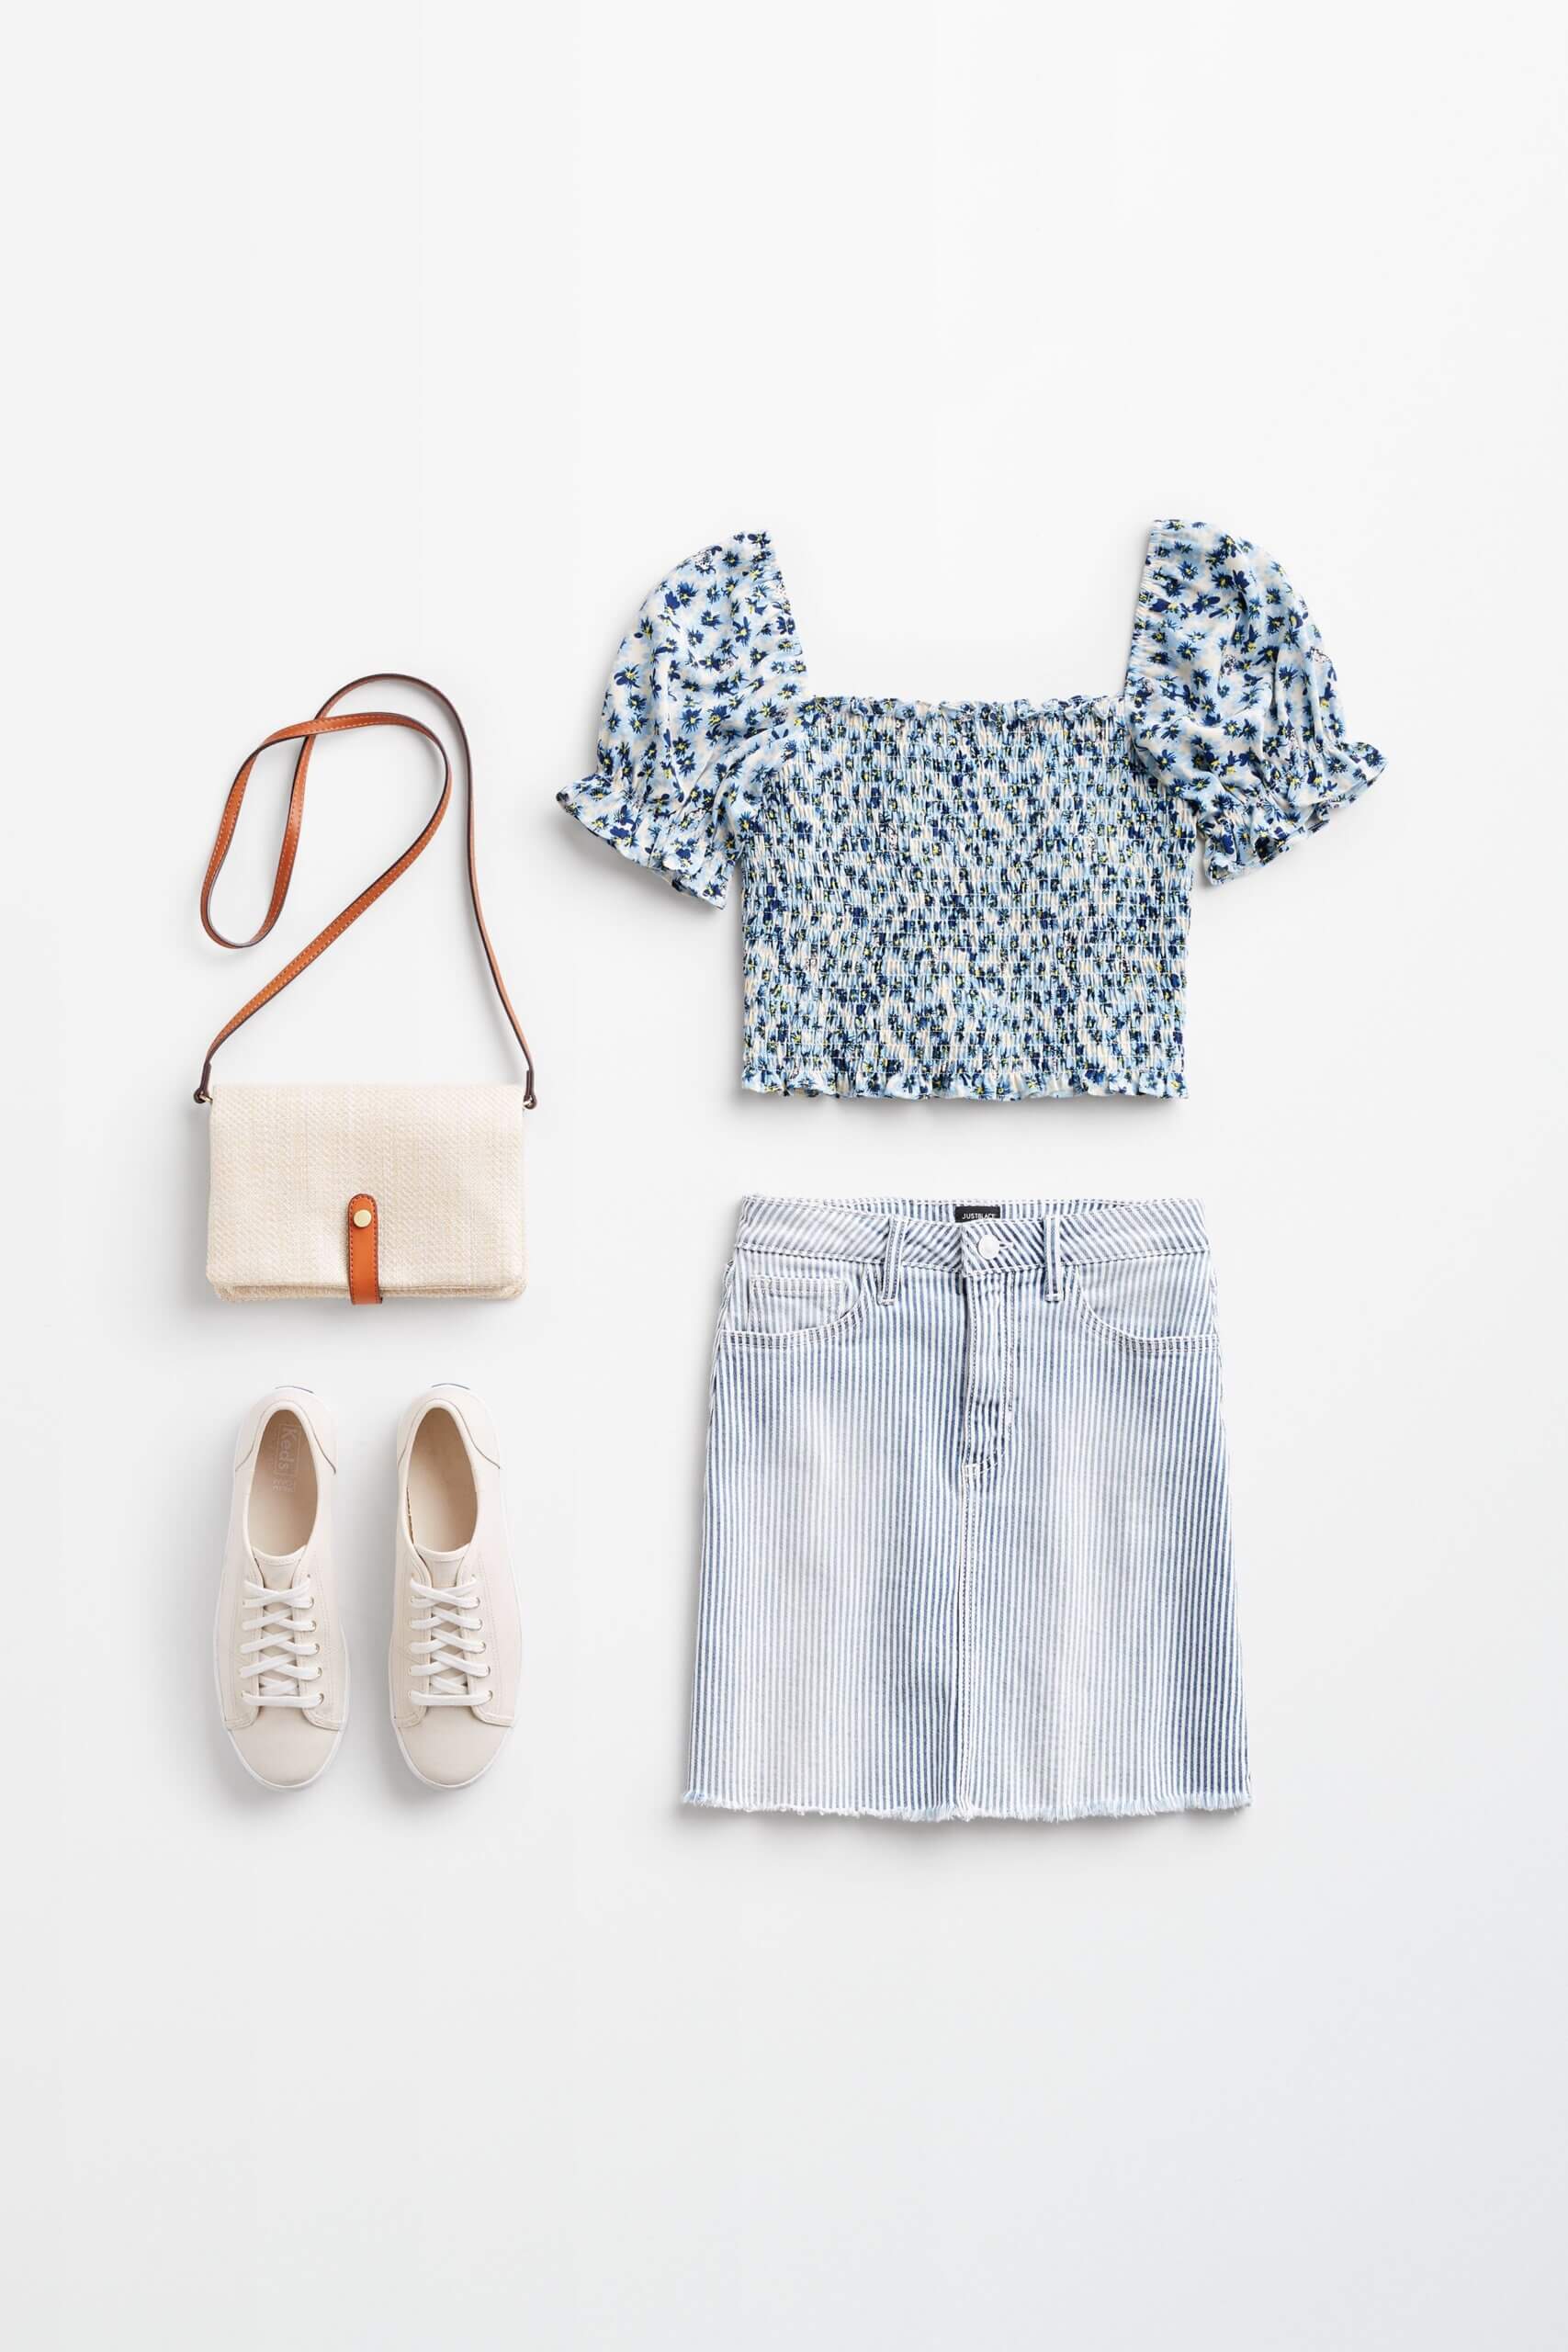 Stitch Fix Women’s outfit laydown featuring denim skirt, smocked blouse with puff sleeves, sneakers and crossbody bag.